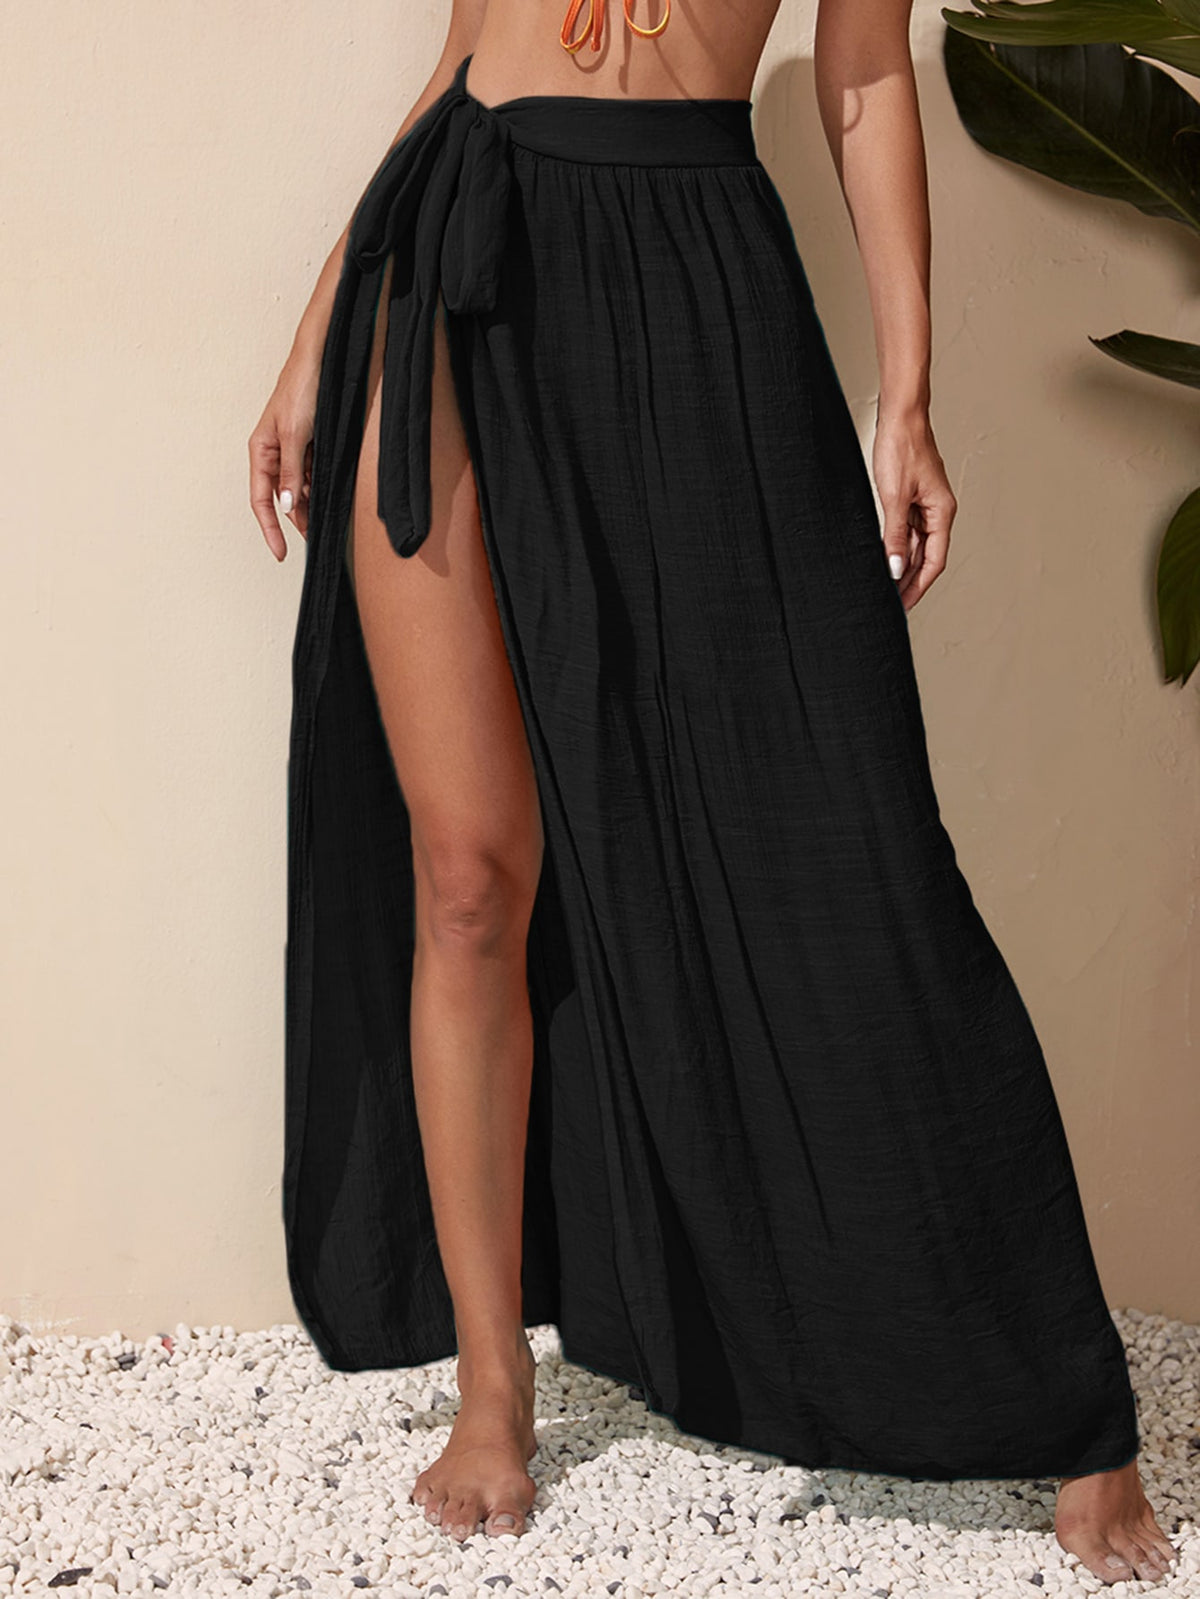 Knotted Coverup Skirt - Black / L